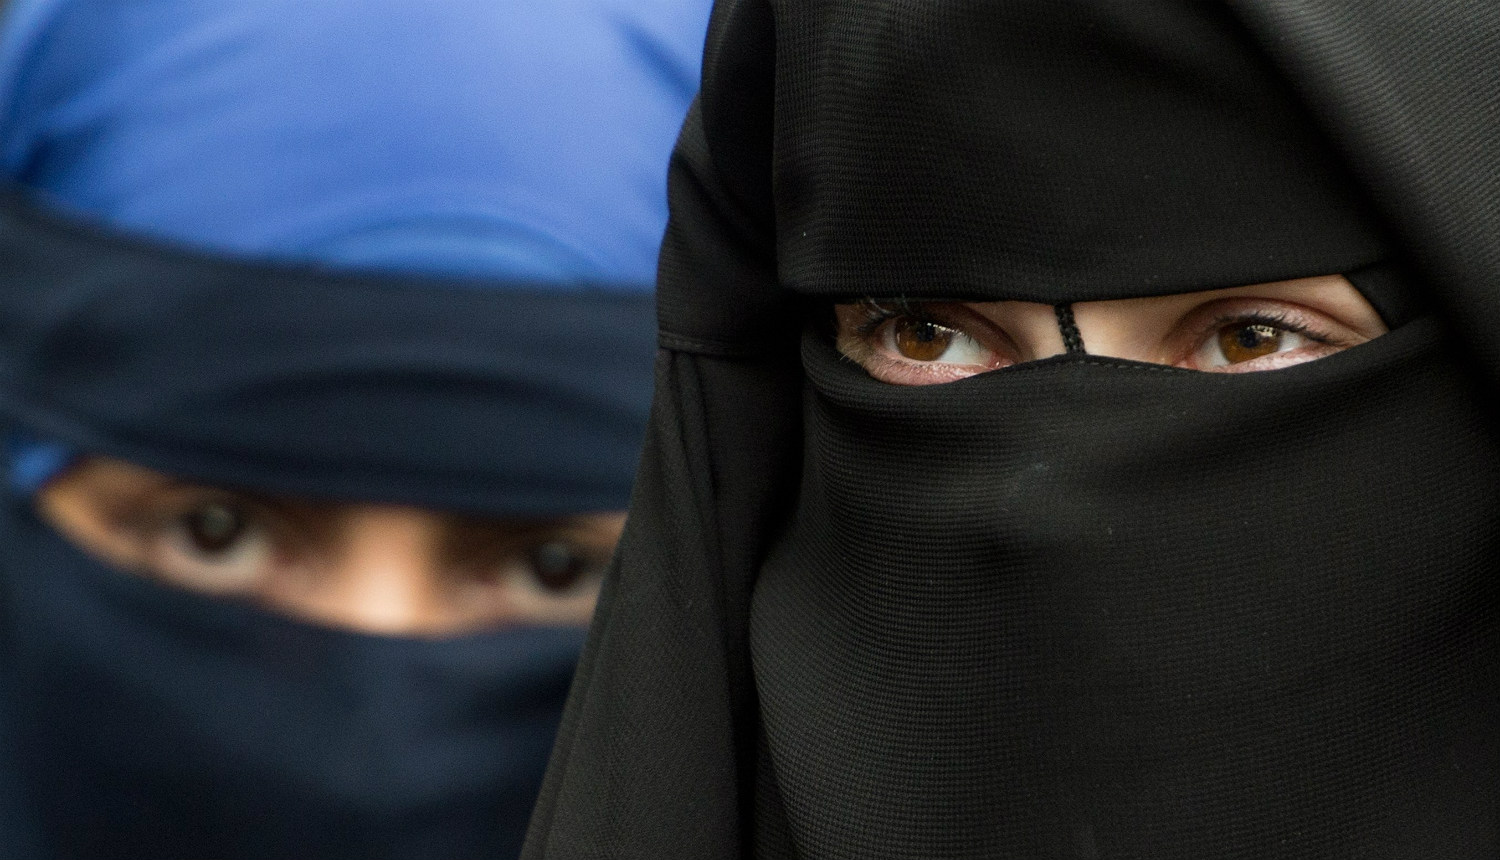 What You Need To Know About Calls To Ban Full Face Veils In German Classrooms